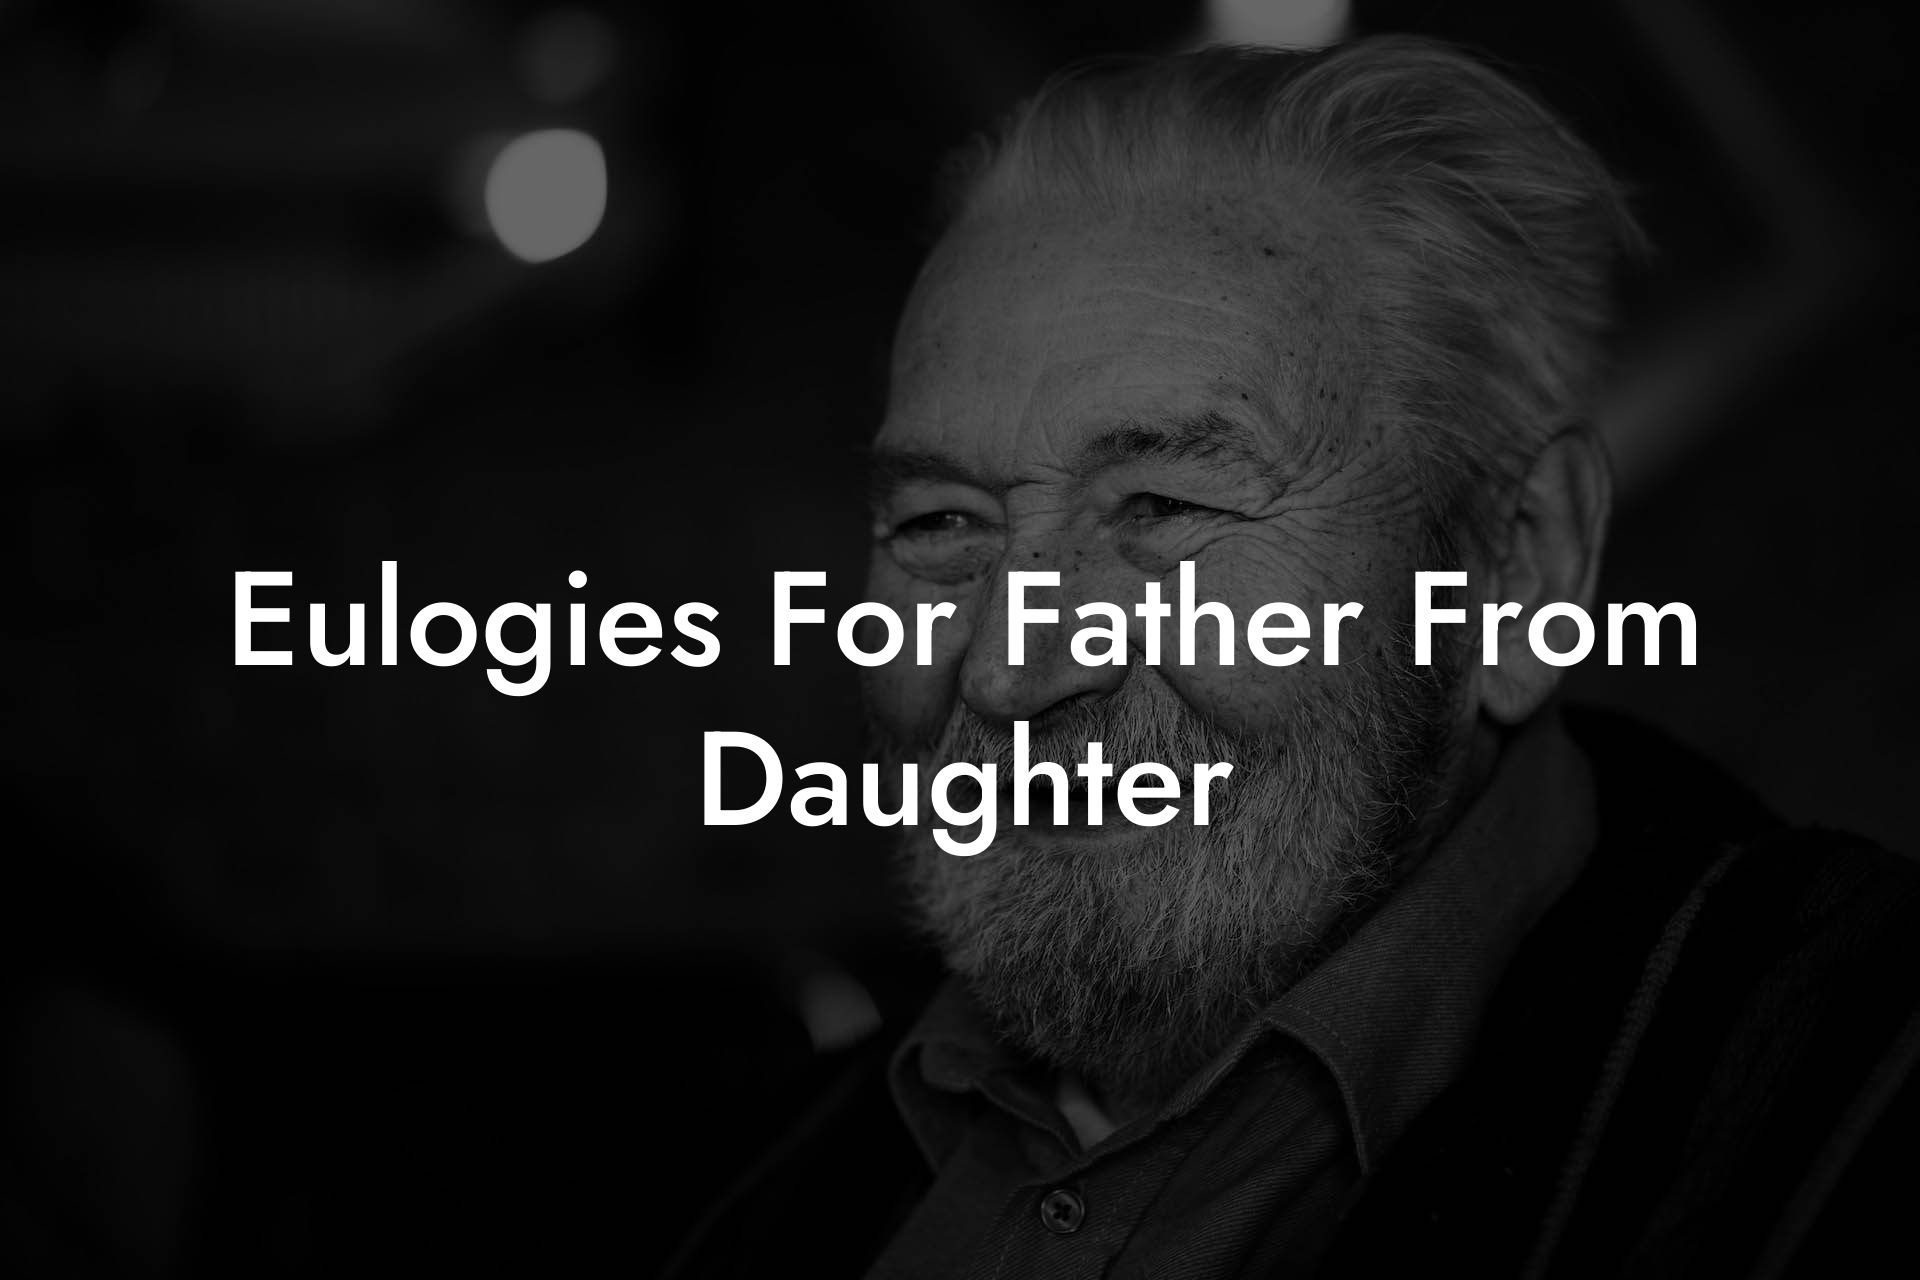 Eulogies For Father From Daughter